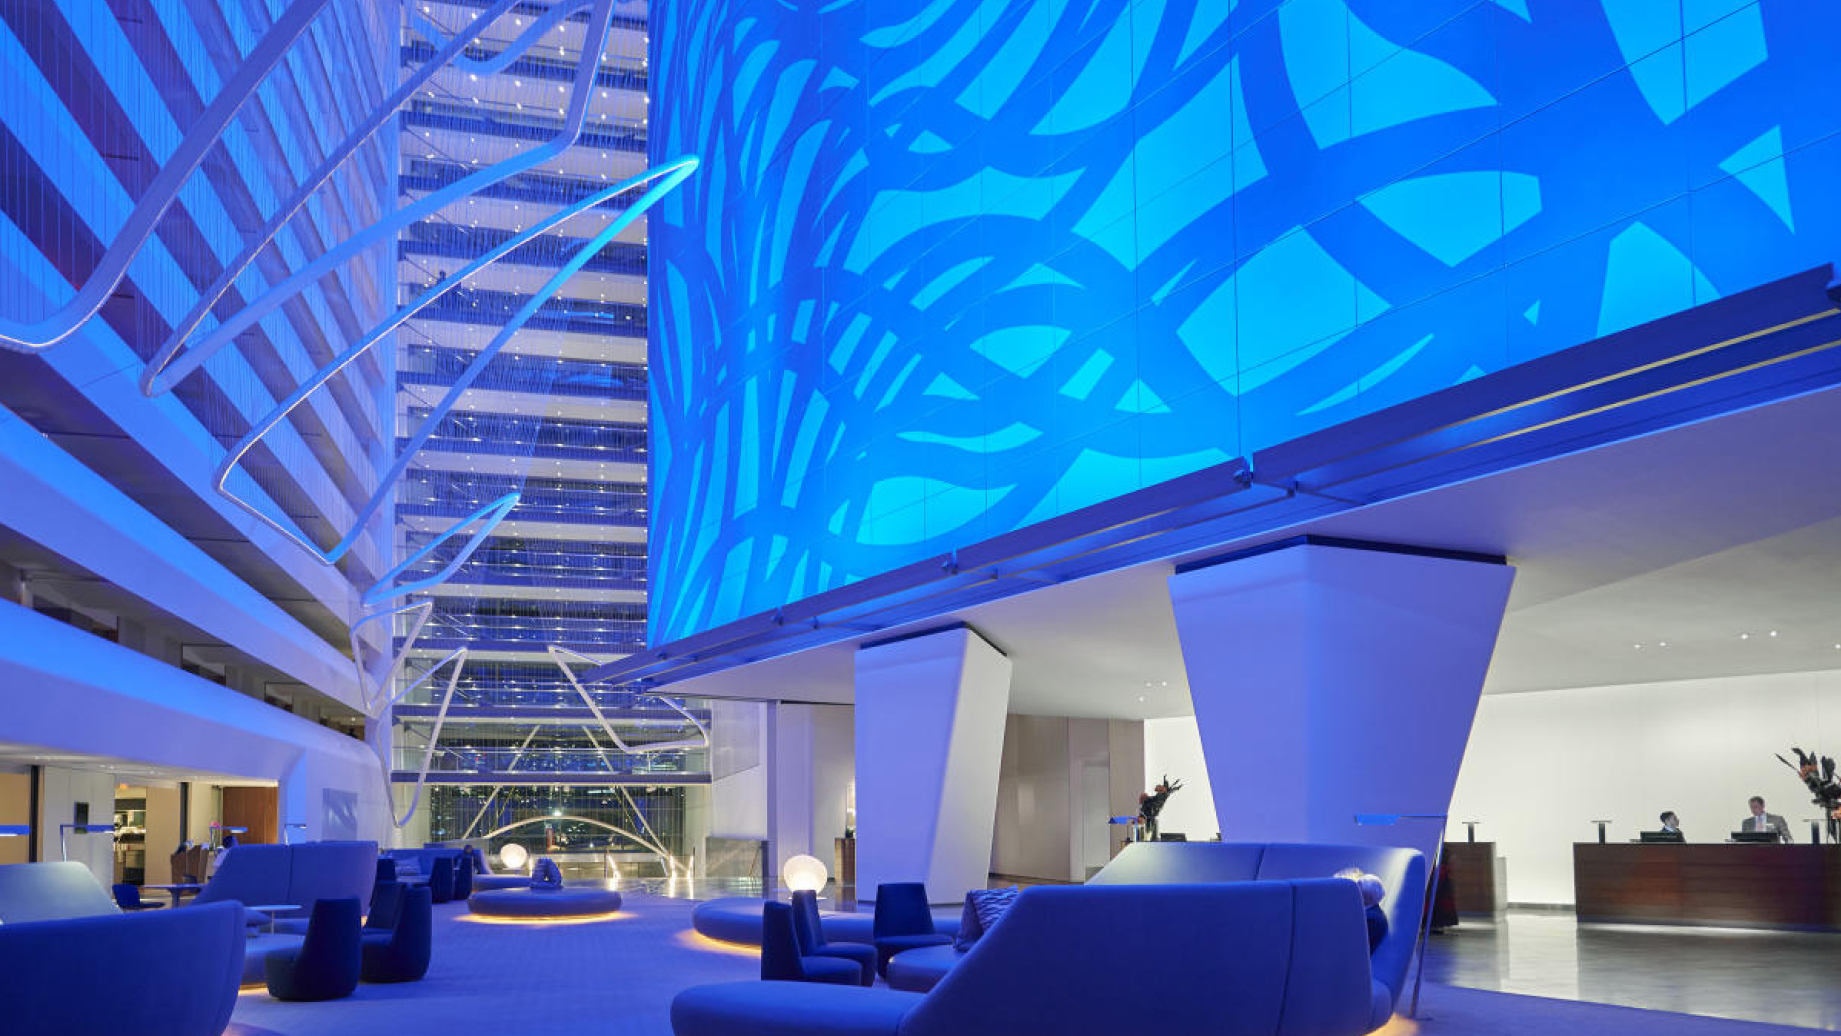 A spacious modern hotel lobby with blue lighting, abstract wall designs, and various seating areas. A reception desk is visible on the far right.